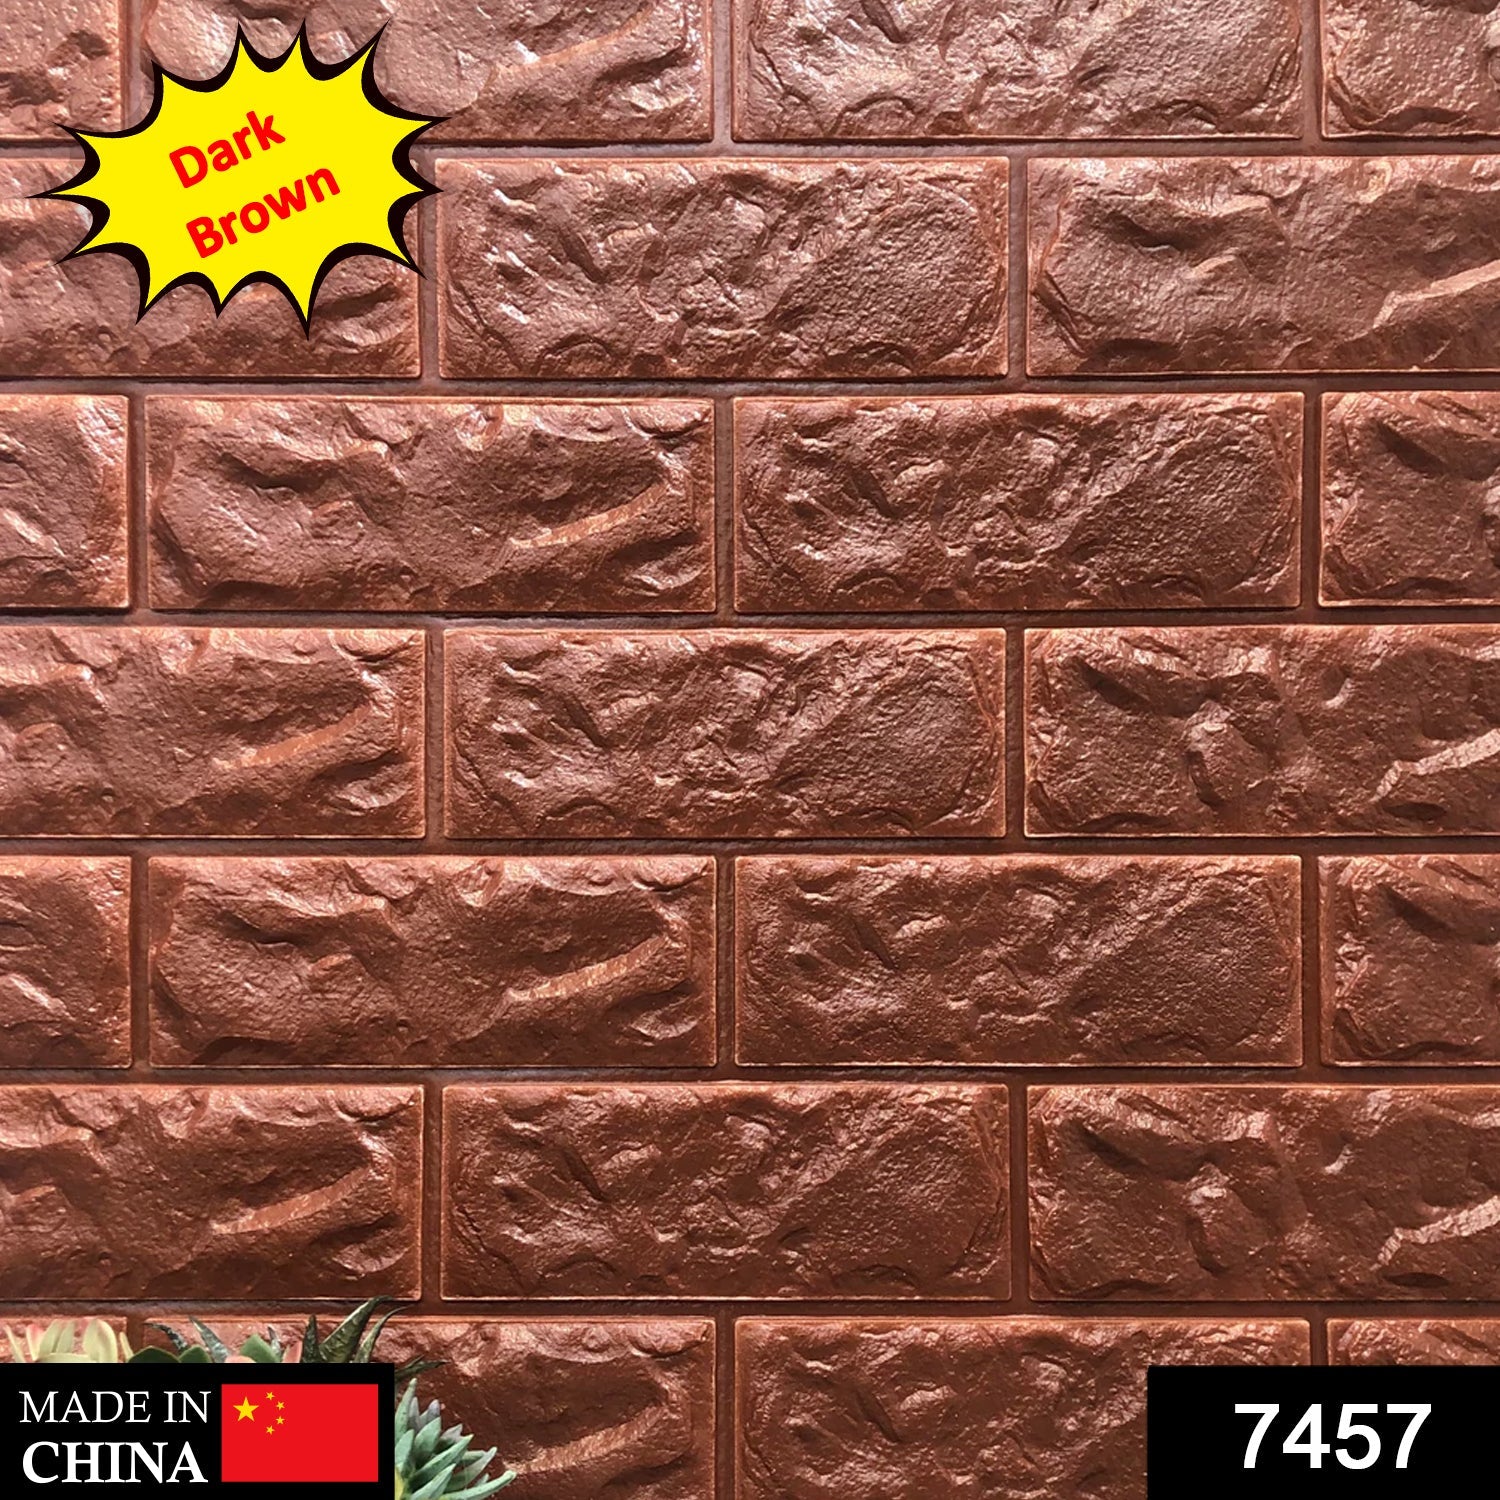 7457 Dark Brown 3D Wall Decor Used Over Walls For Better Texture And Decorated Look. freeshipping DeoDap